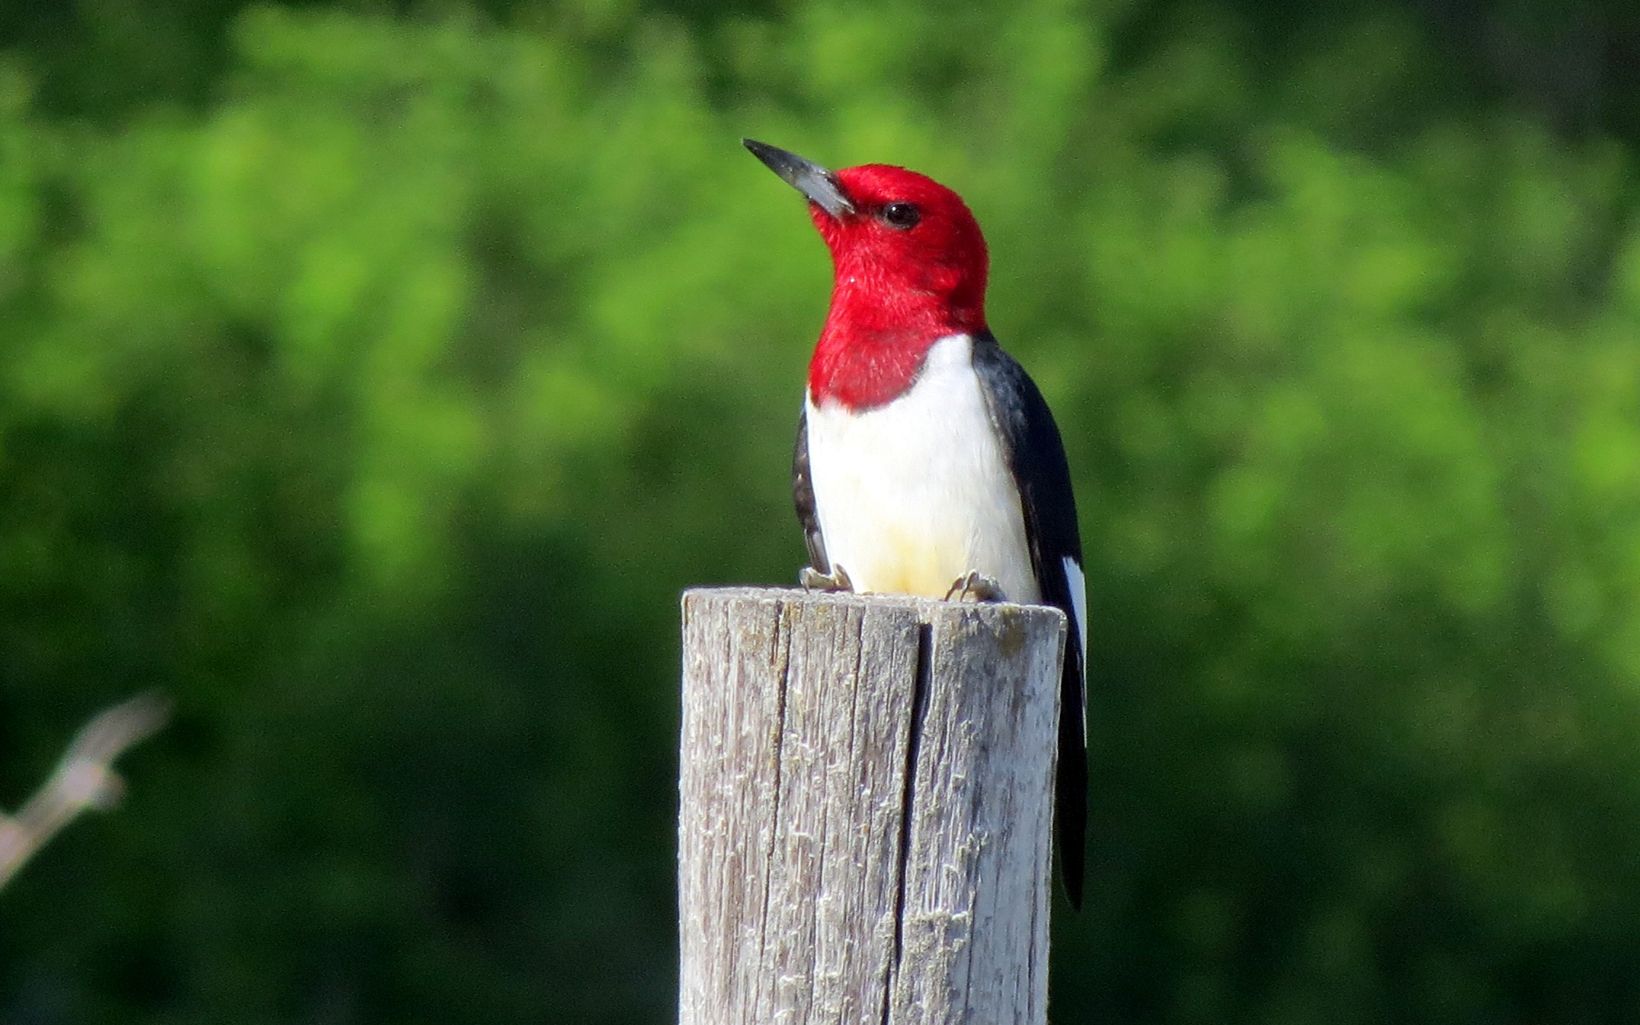 A red-headed woodpecker sits atop a post at the edge of the forest.